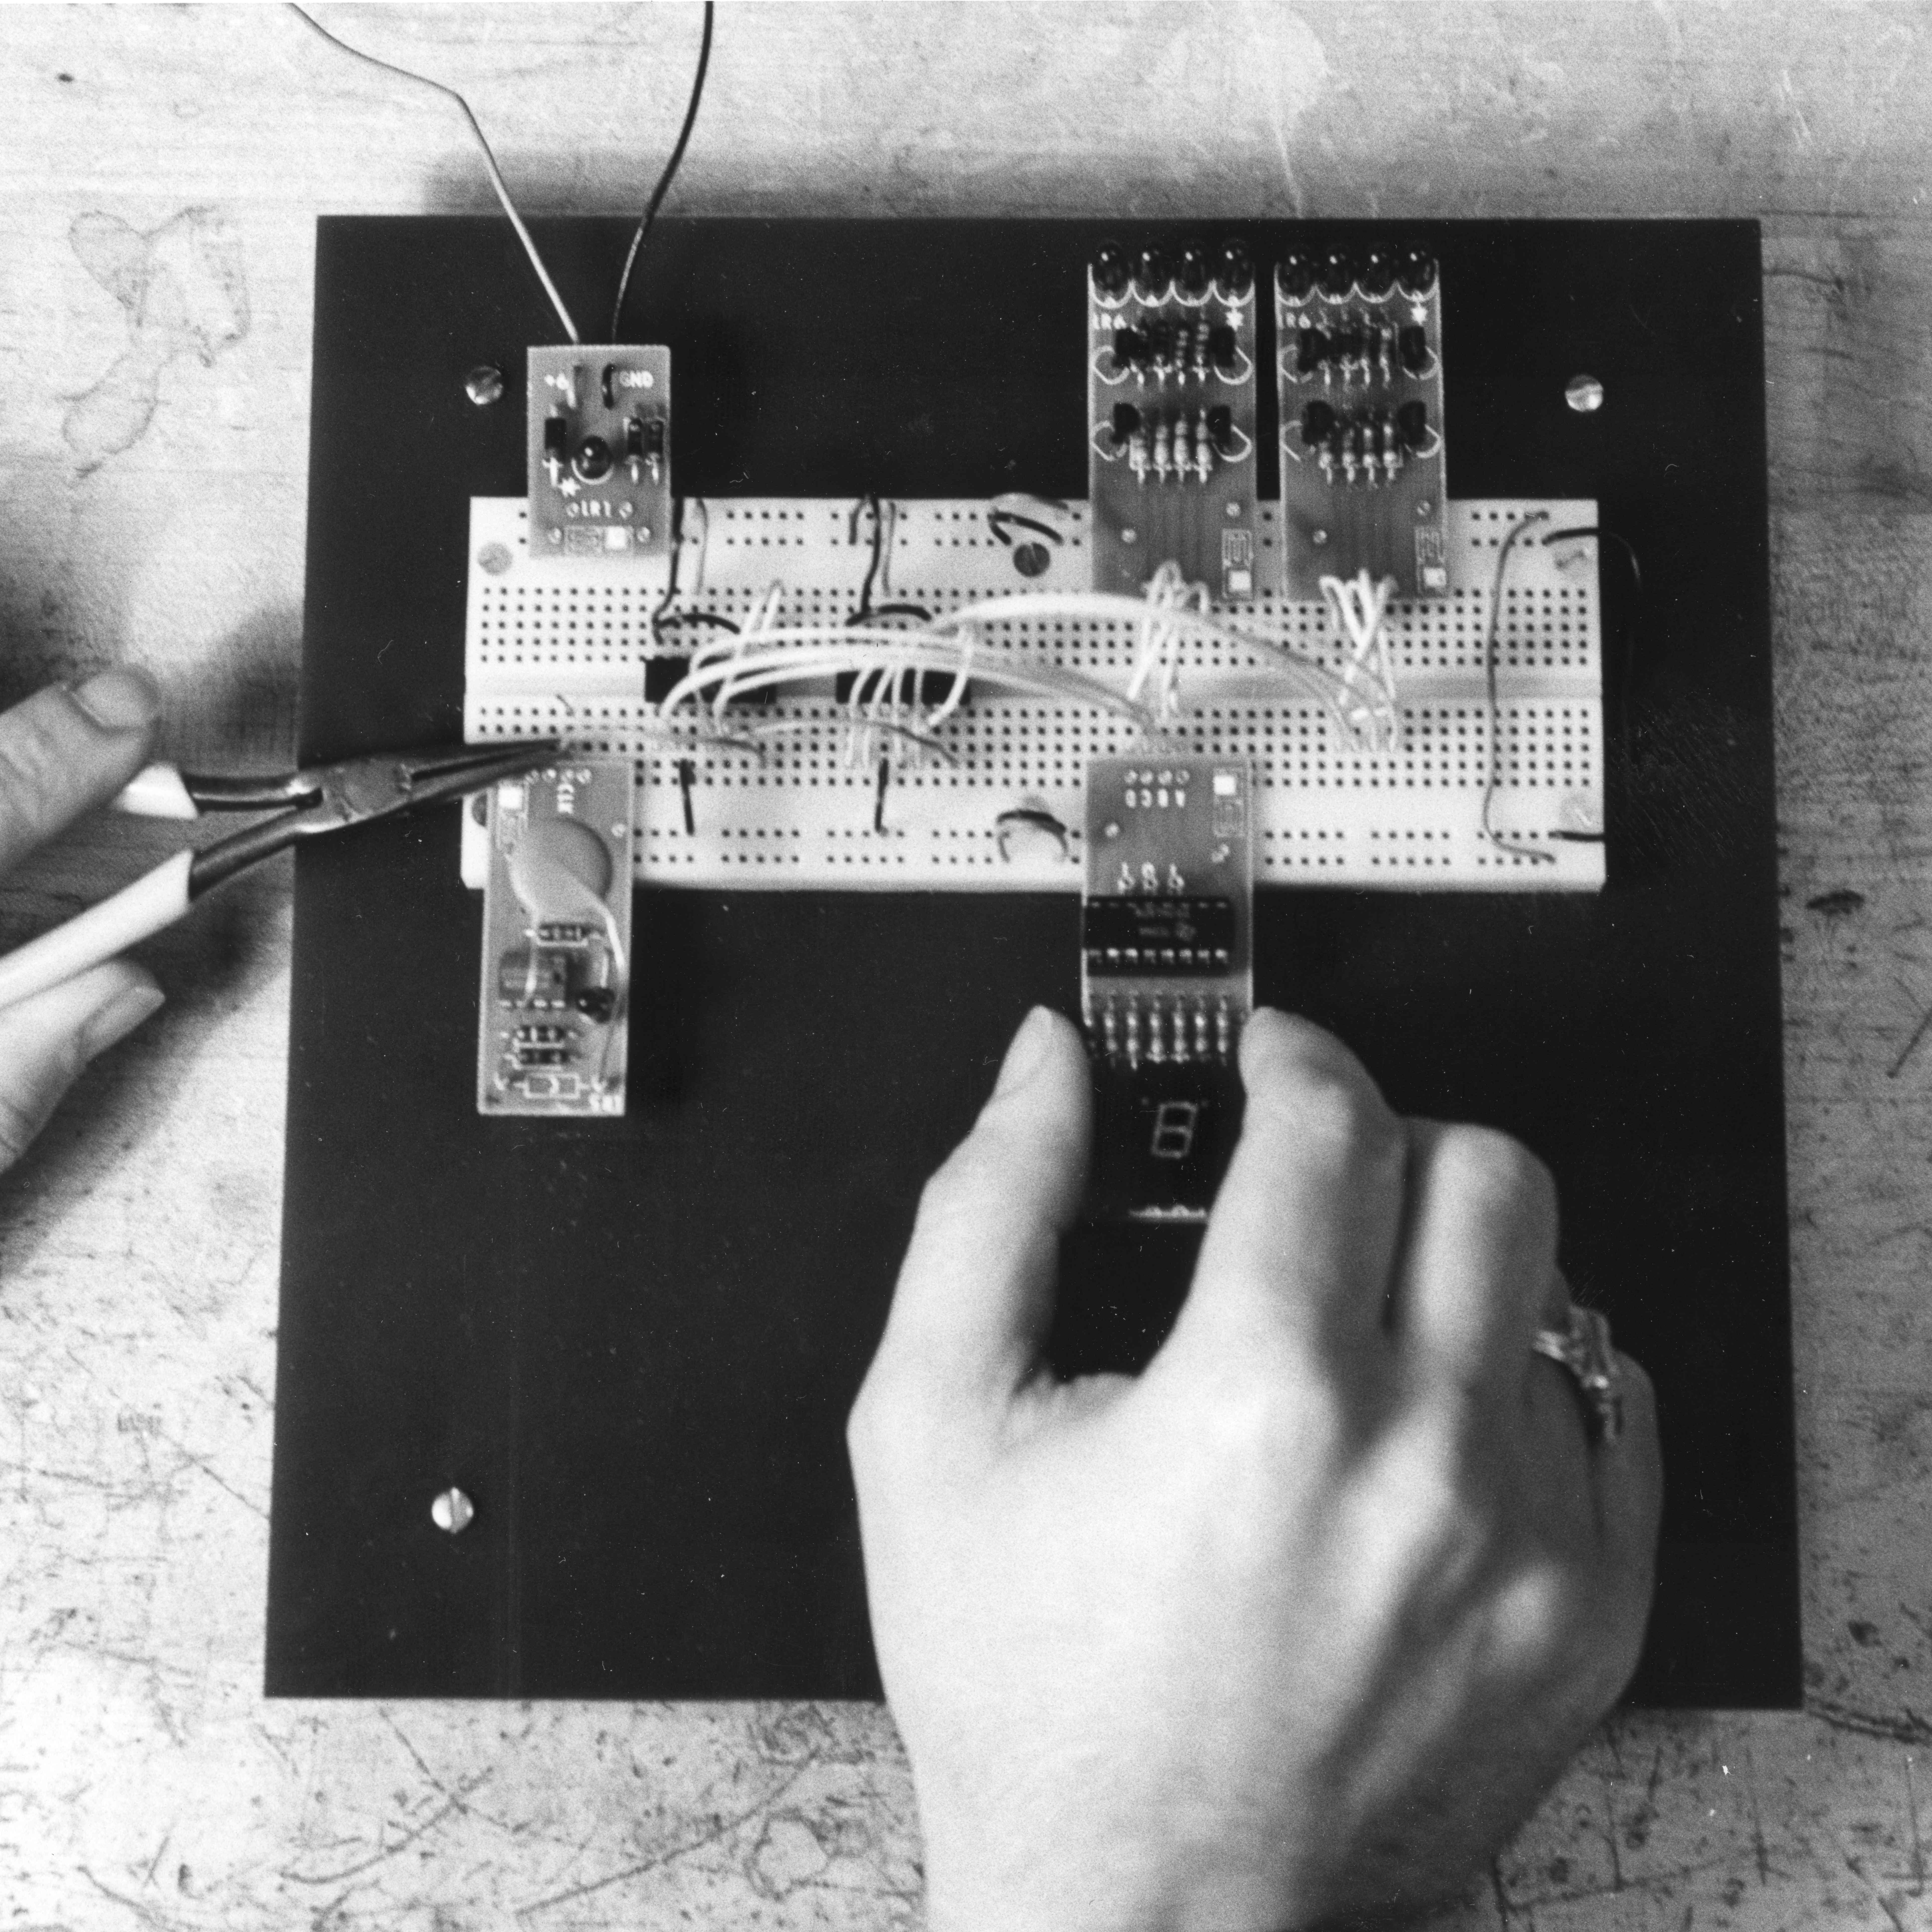 hands can be seen assembling circuits on a breadboard